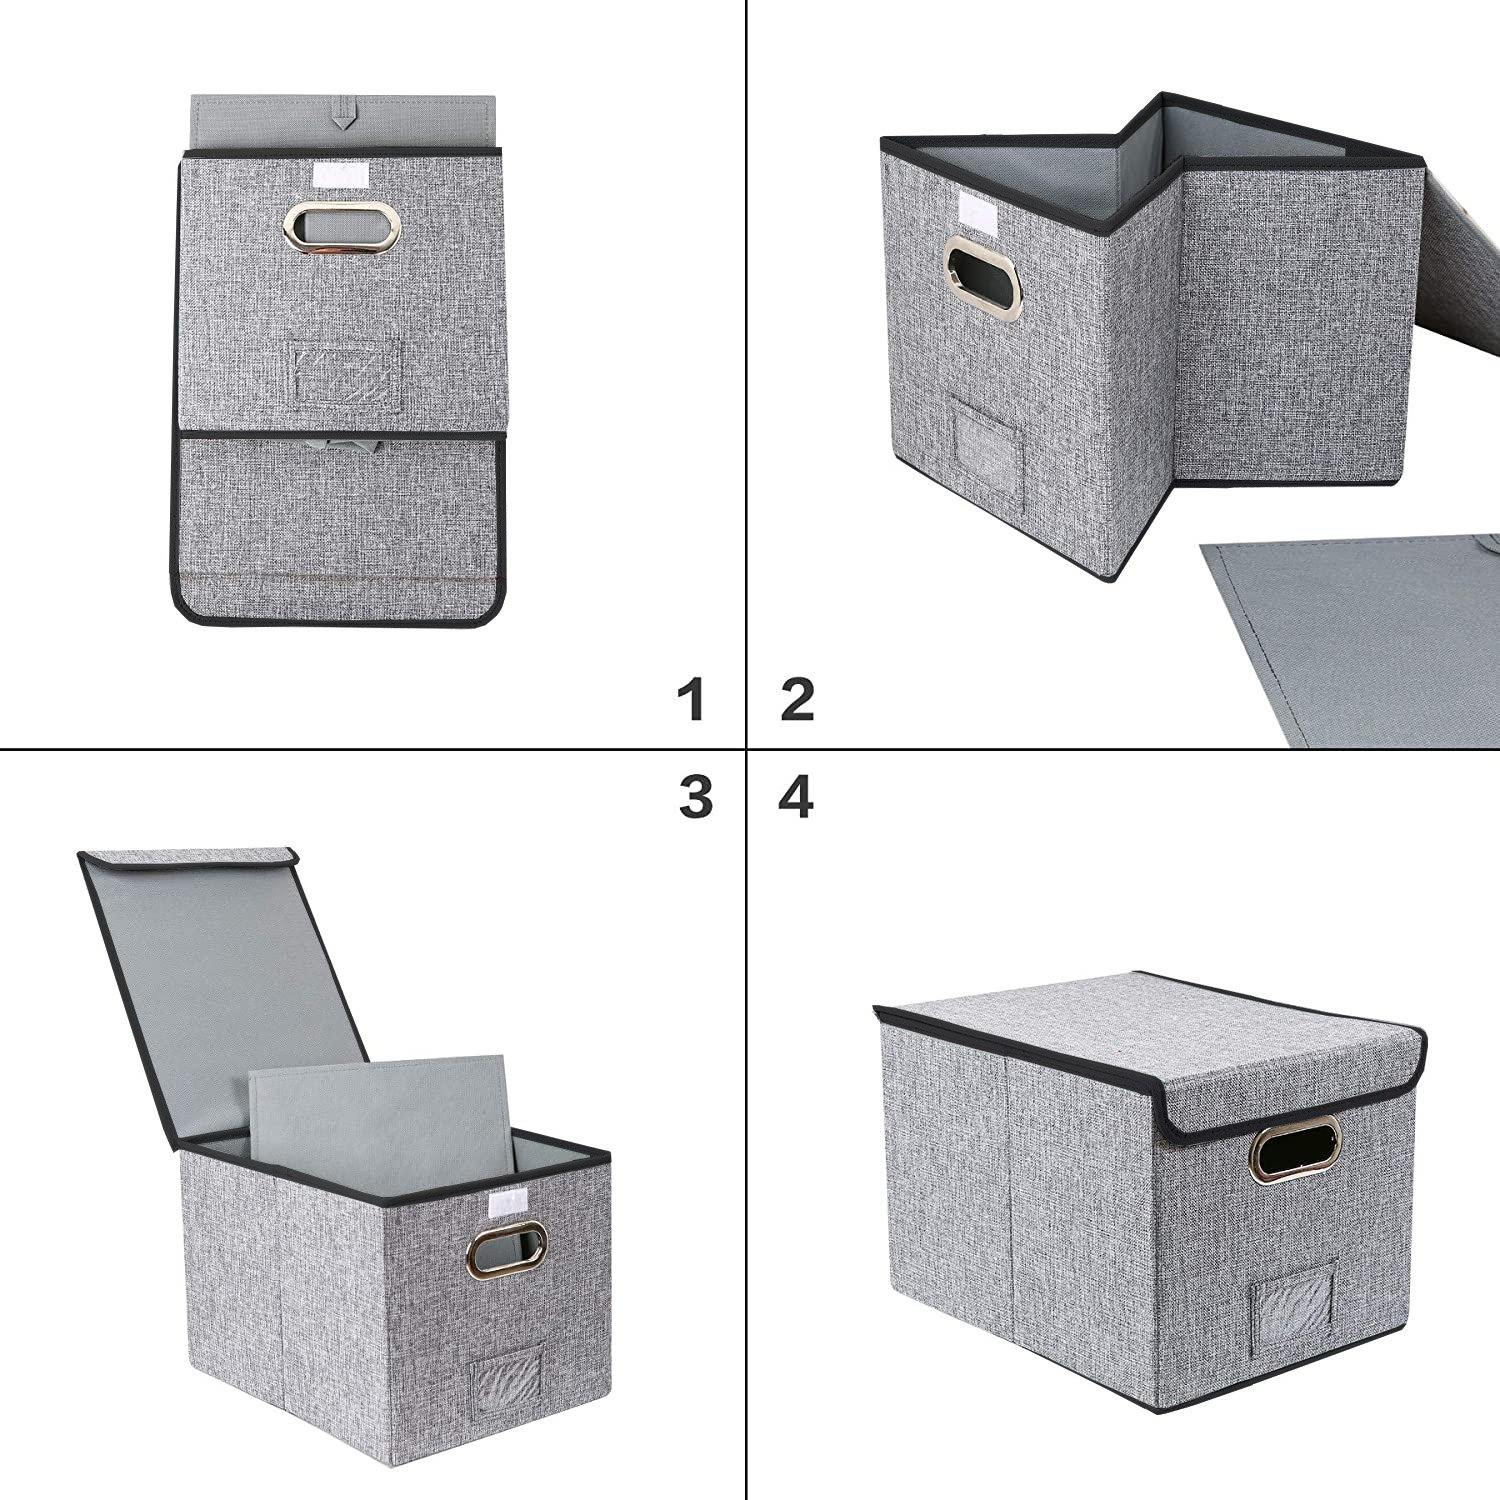 Storage Box Container Bins with Lids Covers and Metal Handles for Office, Bedroom, Closet, Kids Toys Grey